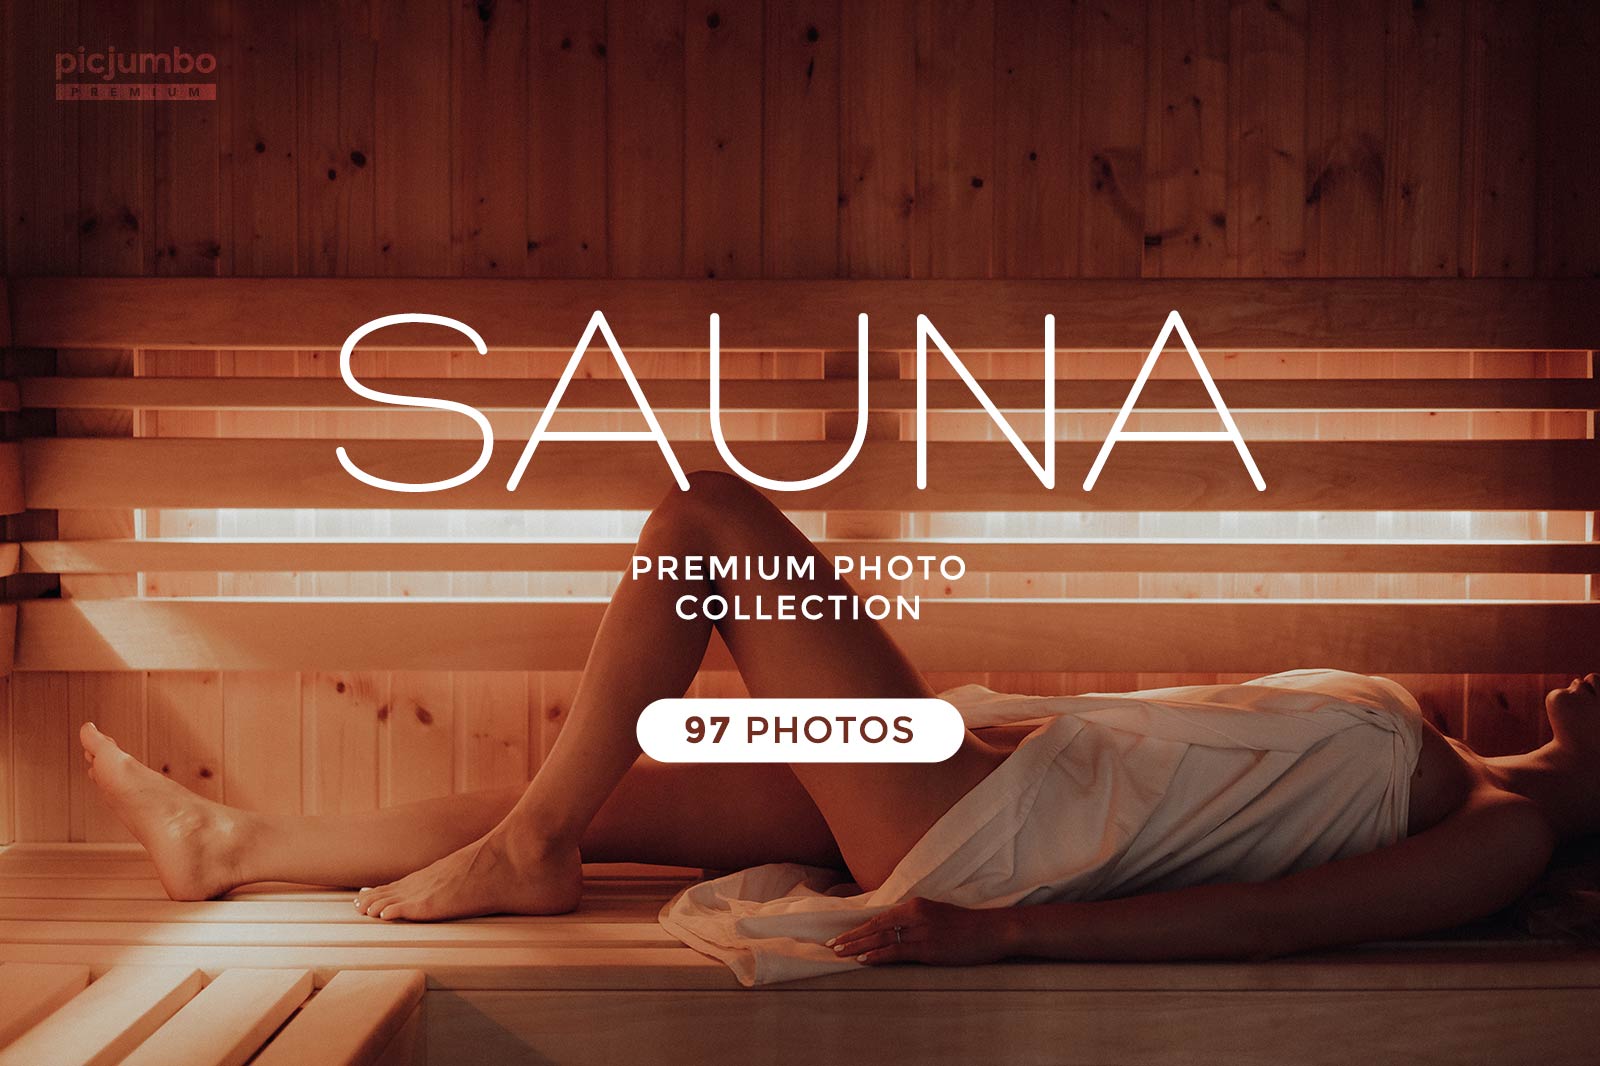 Download hi-res stock photos from our Sauna PREMIUM Collection!